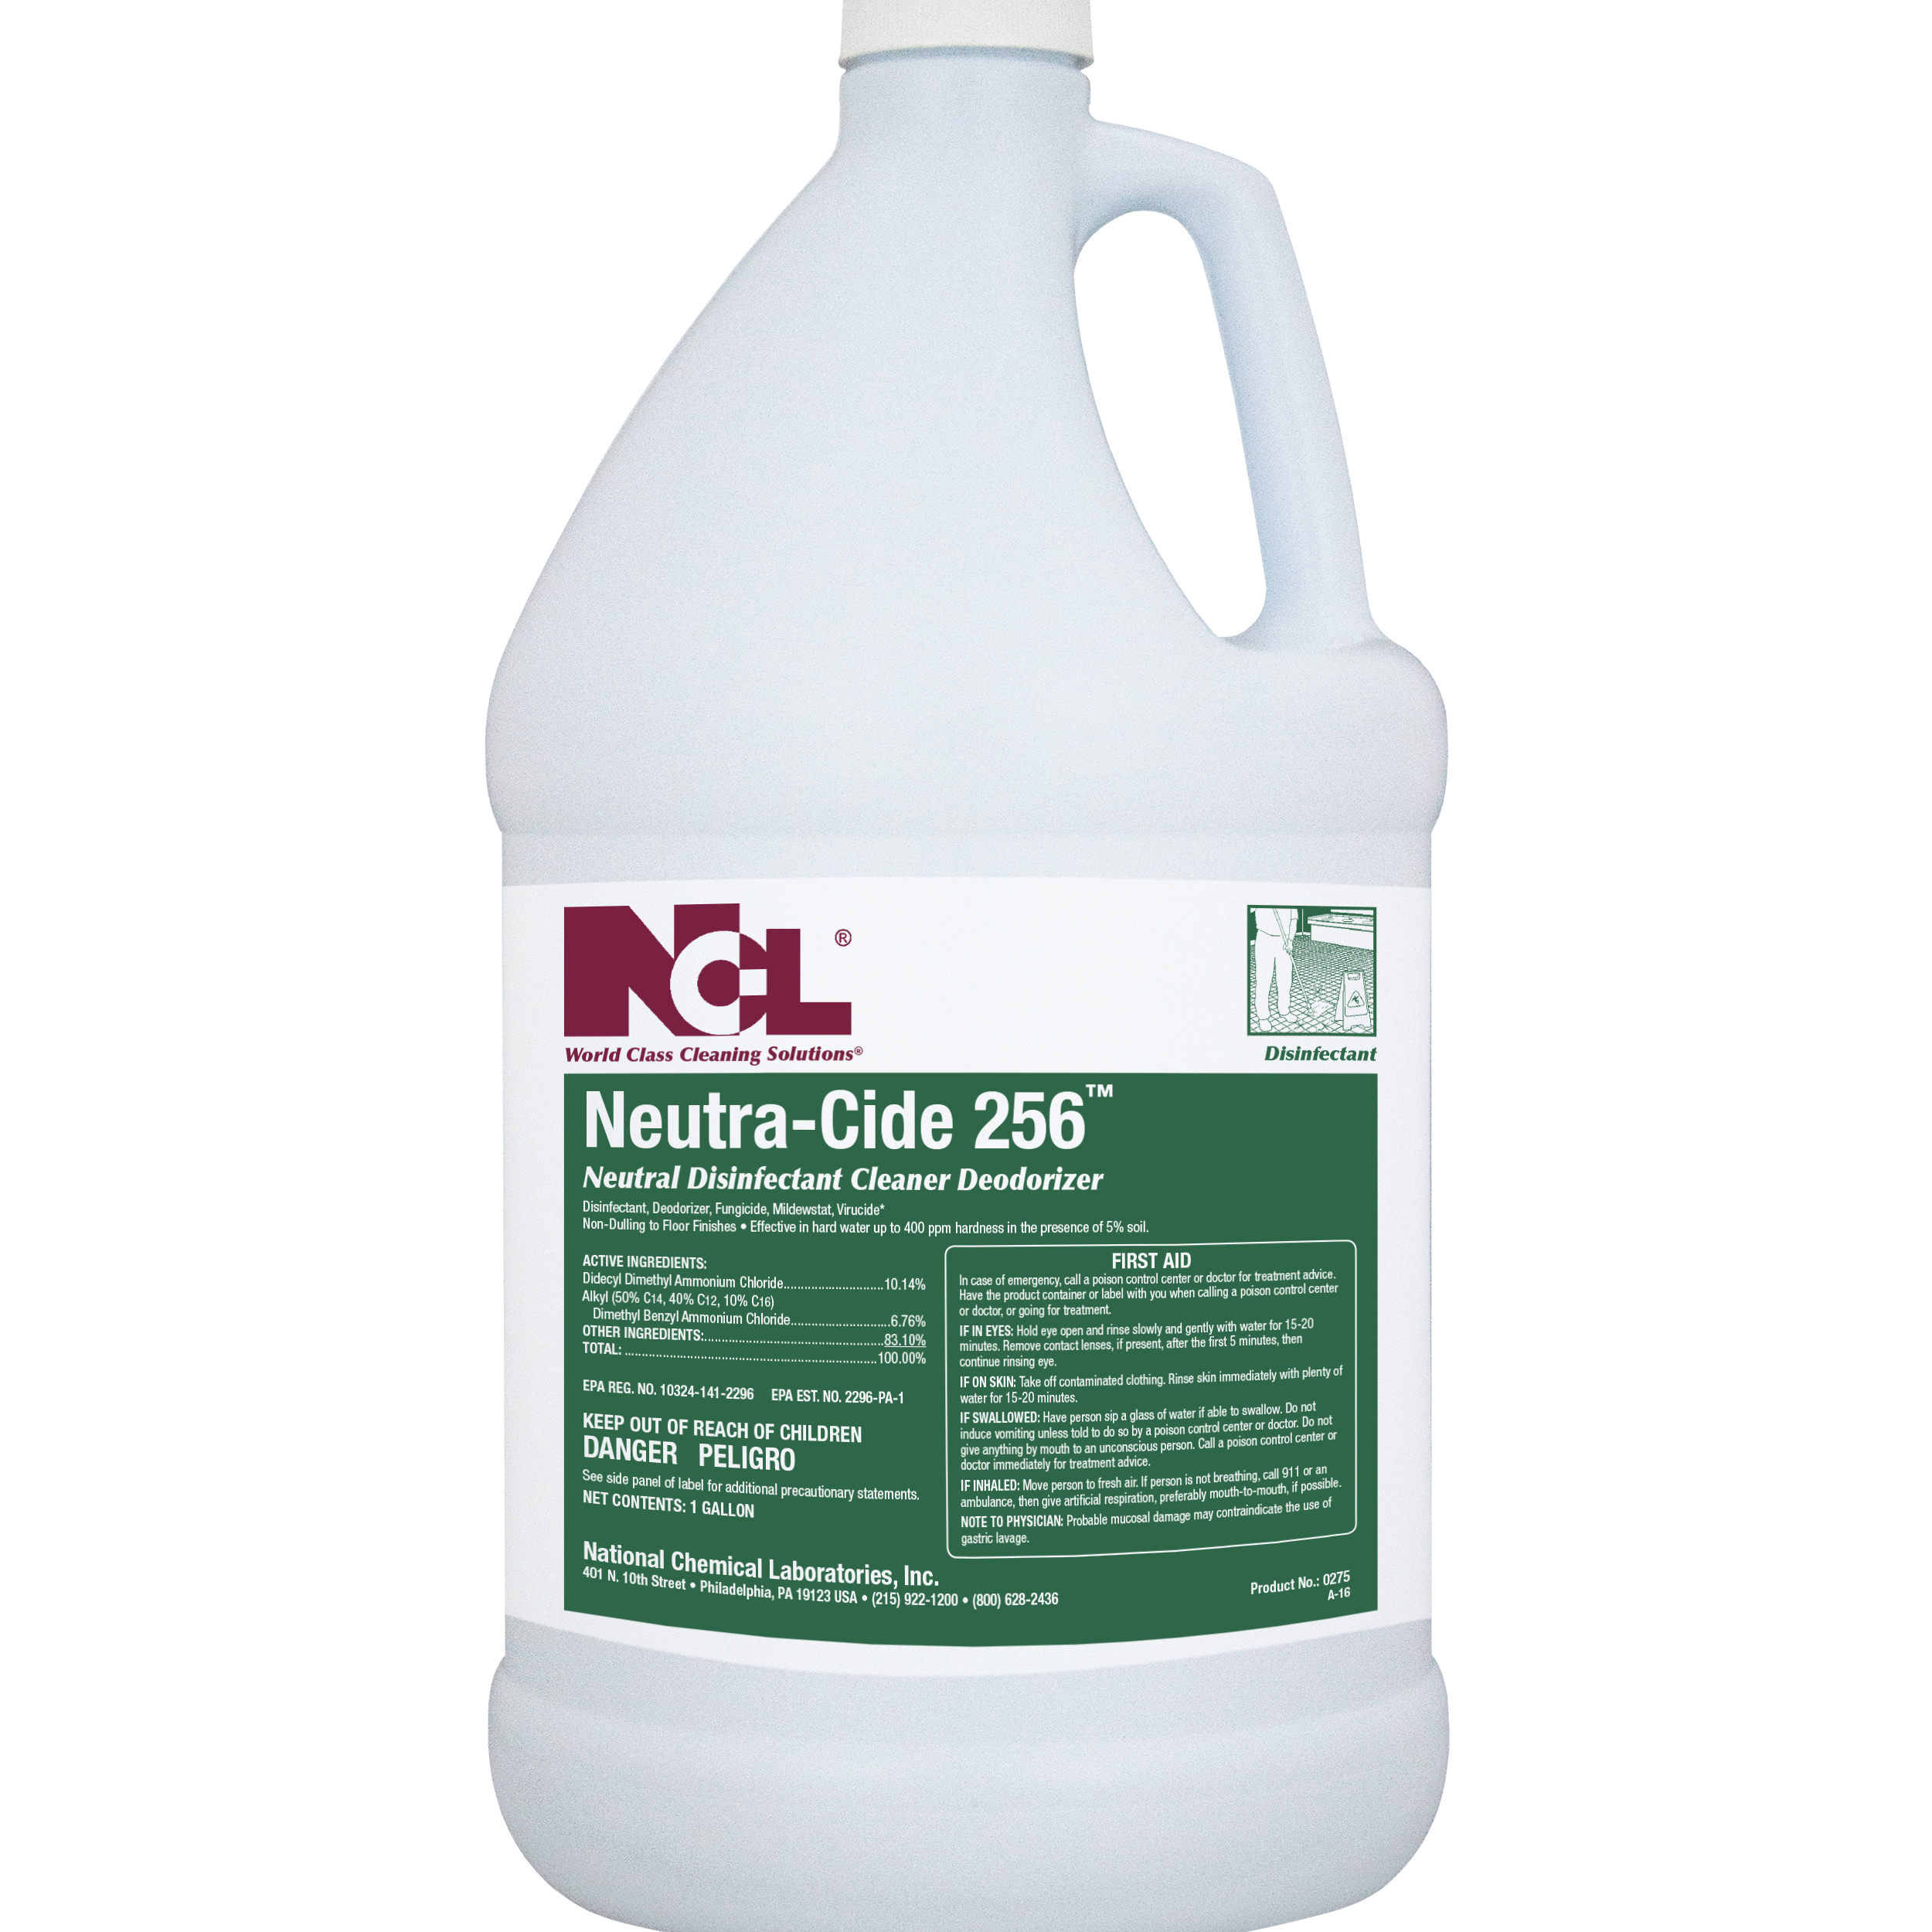  NEUTRA-CIDE 256 Neutral Disinfectant Cleaner / Deodorizer 4/1 Gal. Case (NCL0275-29) 